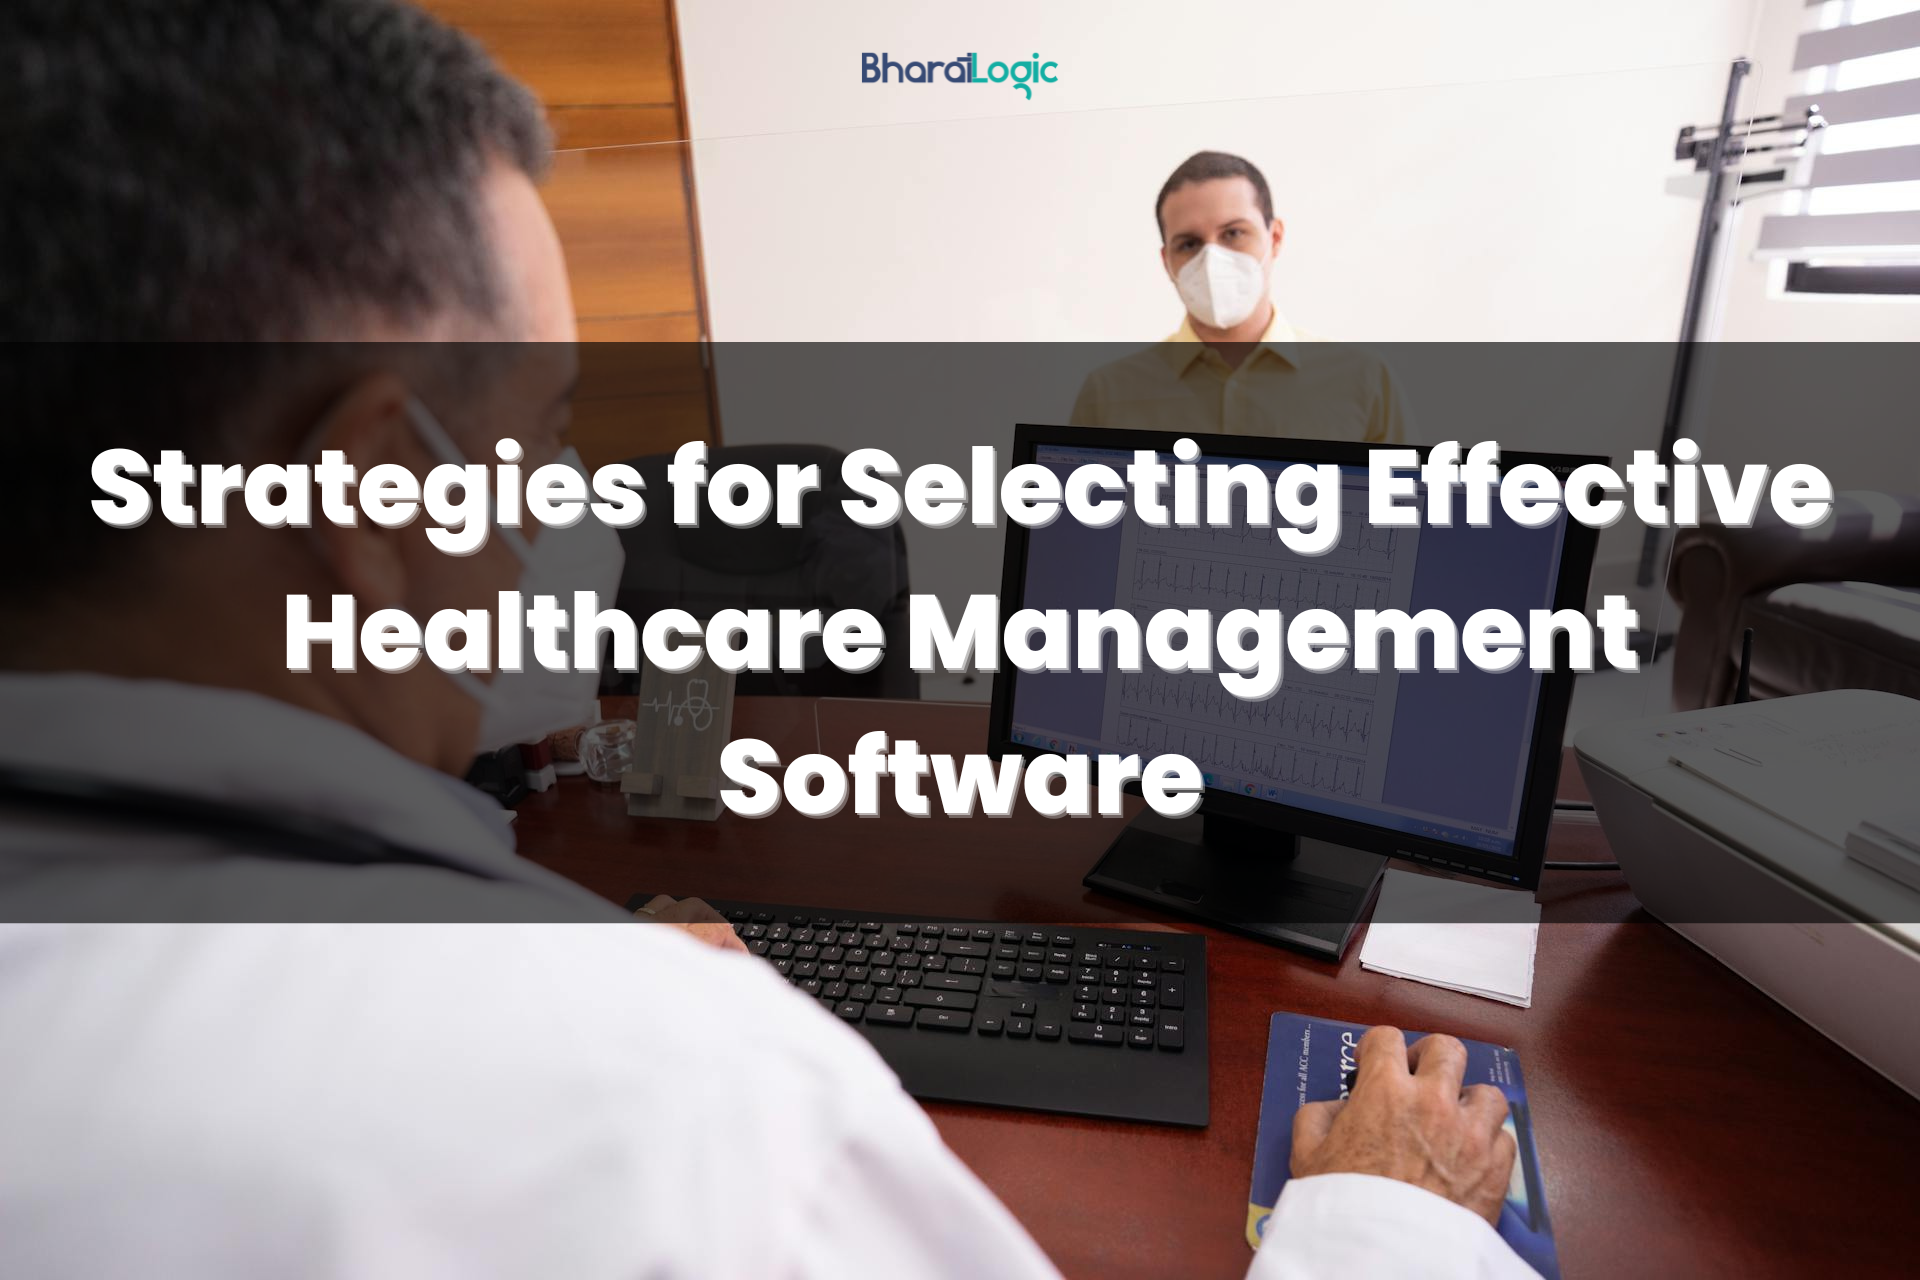 Strategies for Selecting Effective Healthcare Management Software